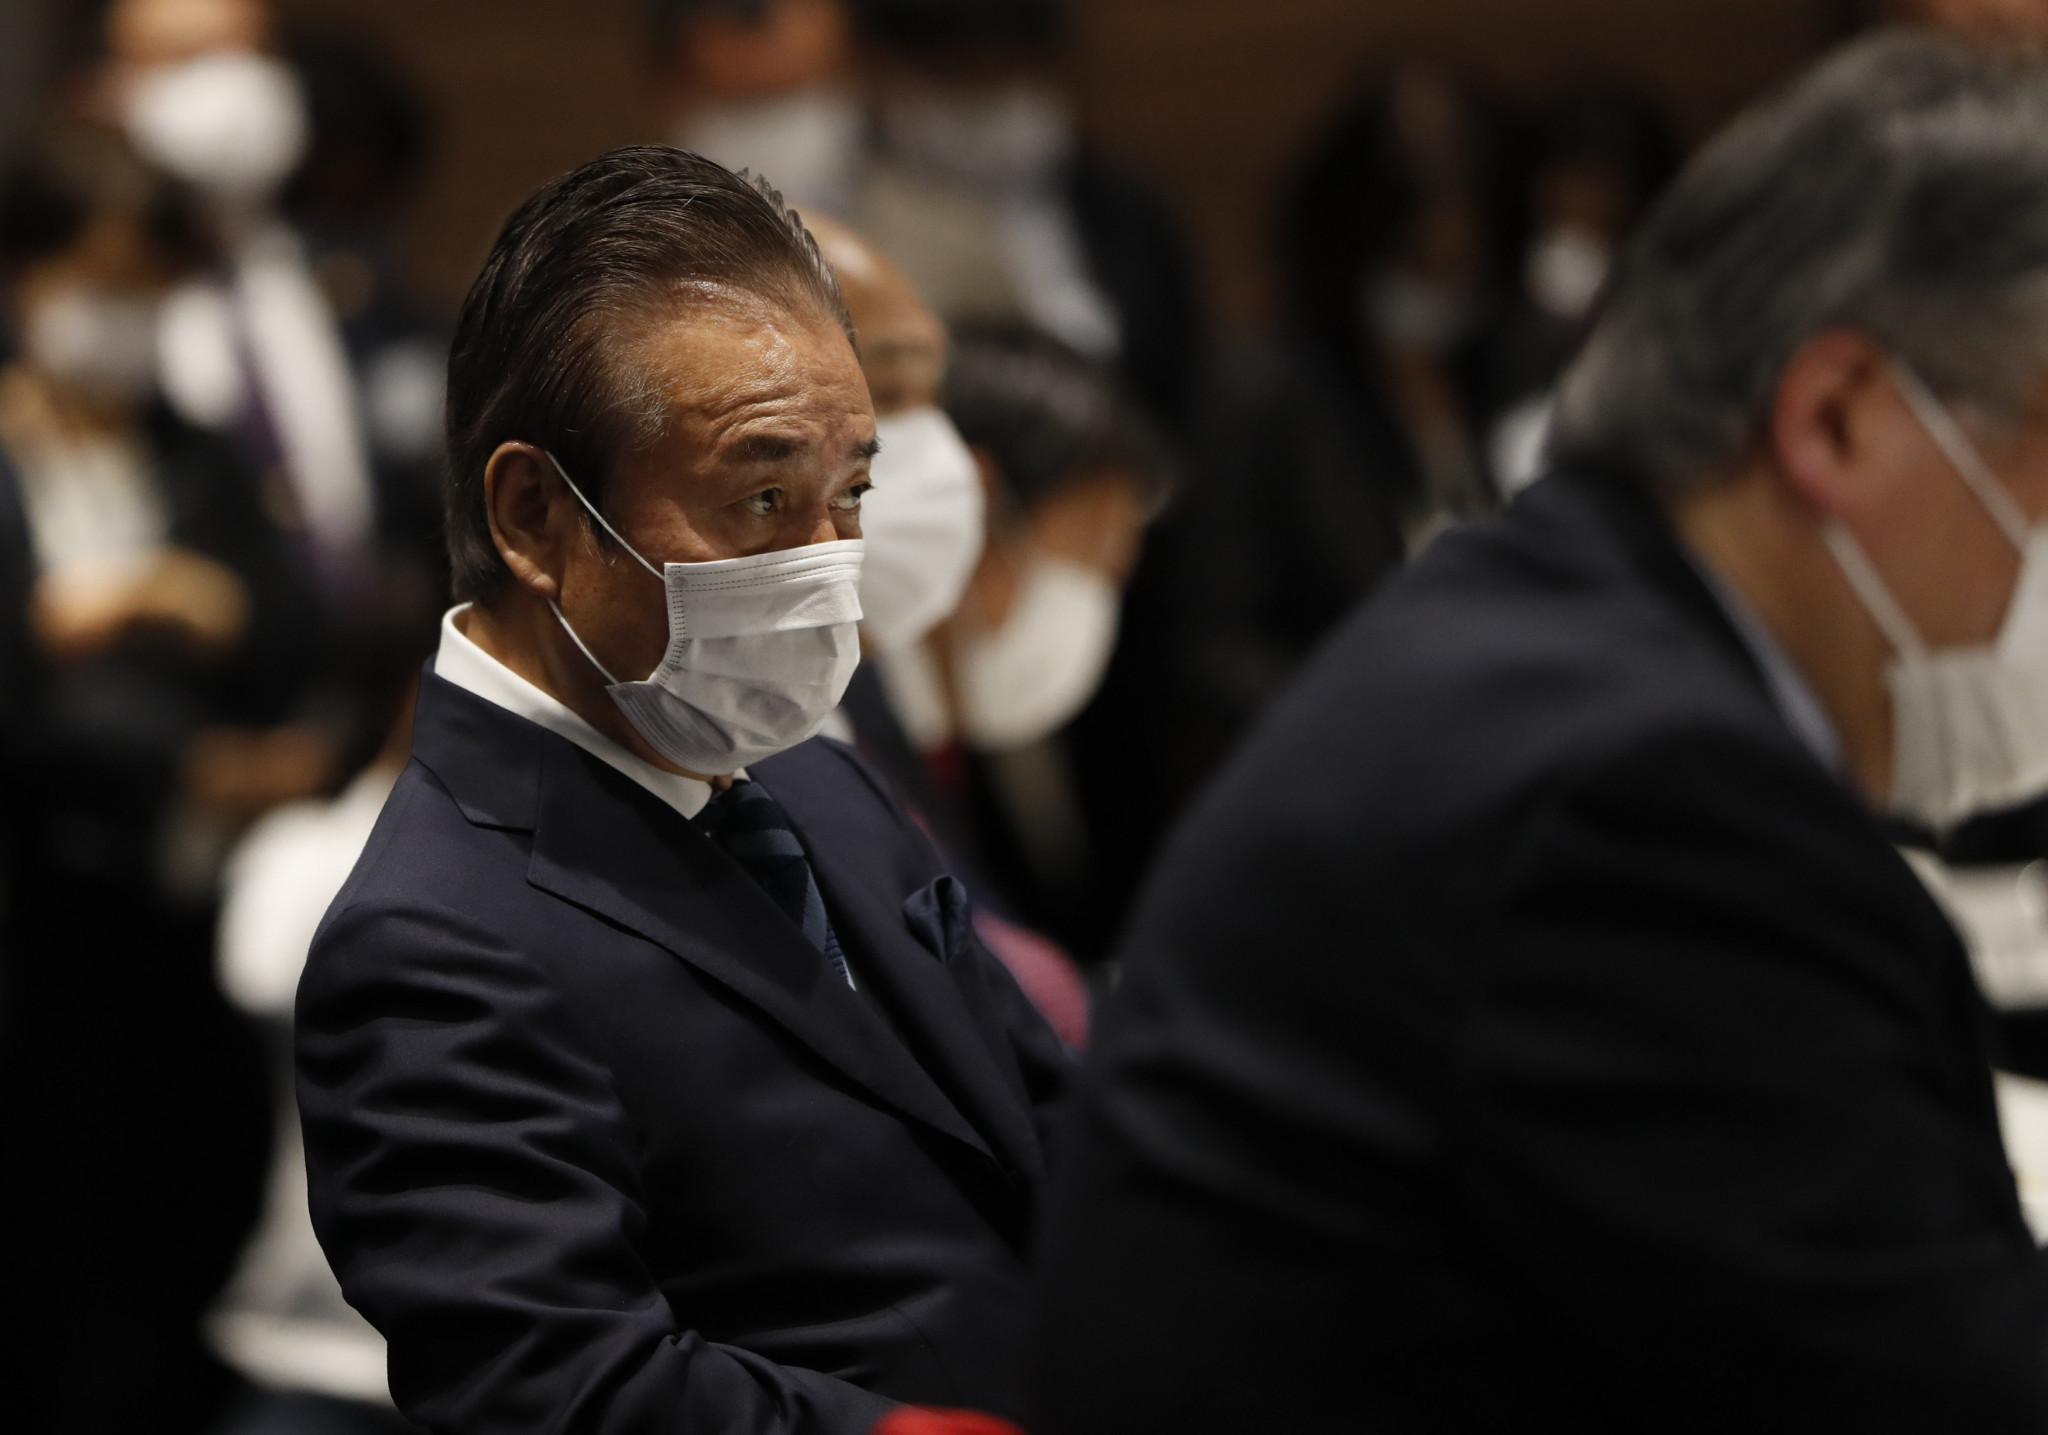 Tokyo 2020 Olympic and Paralympic sponsorships reject relationship with Board member Takahashi